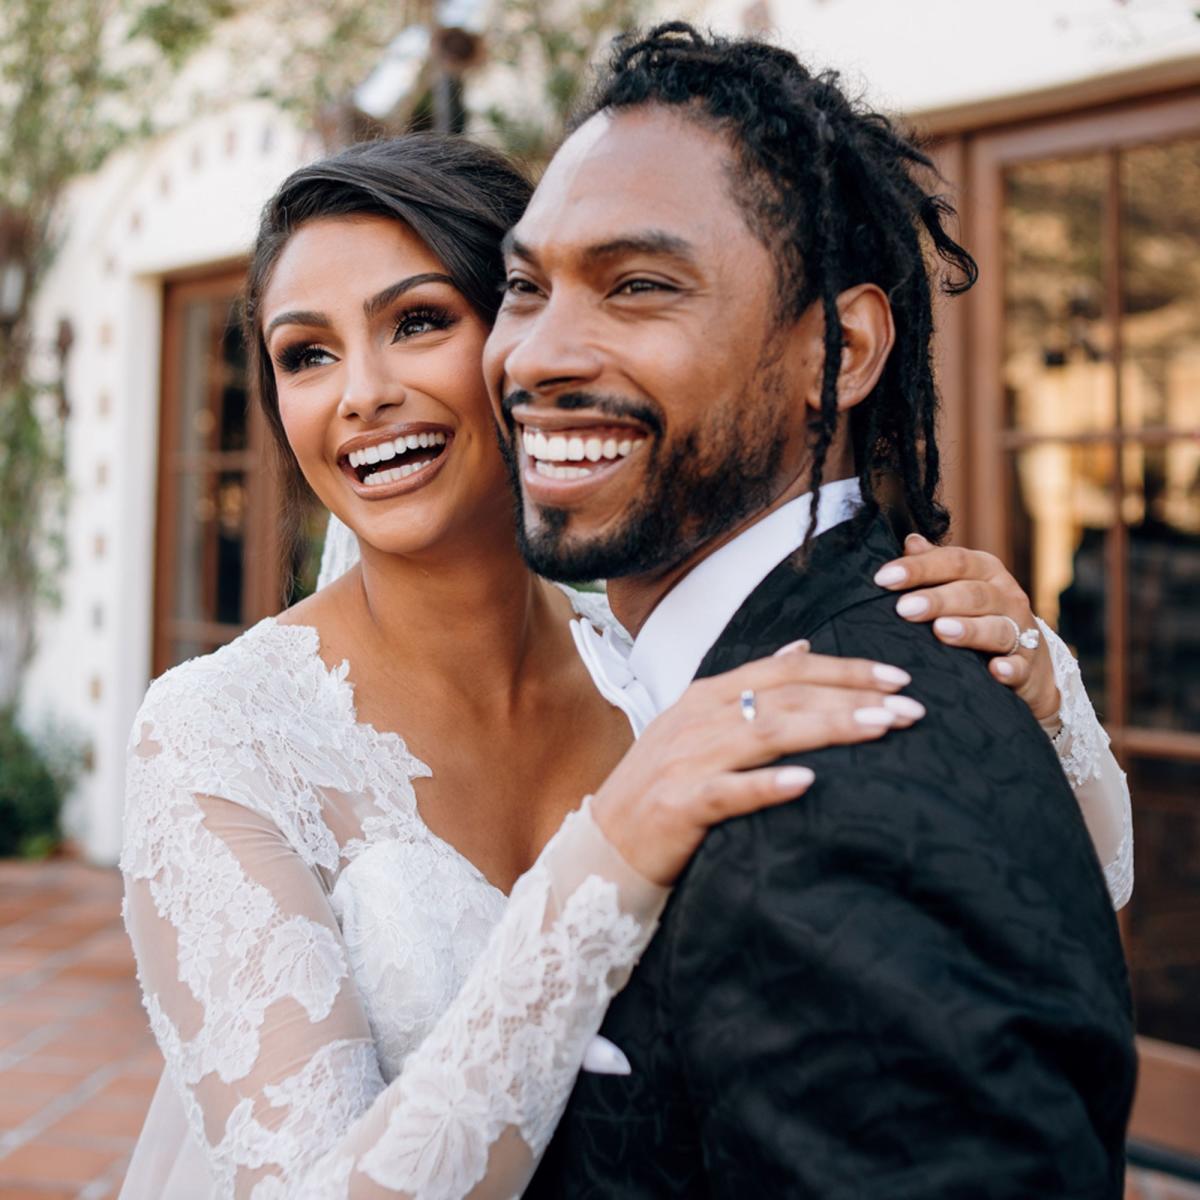 For Her Wedding to Miguel, Nazanin Mandi Channeled Sophia Lorens Bombshell Beauty With a Twist